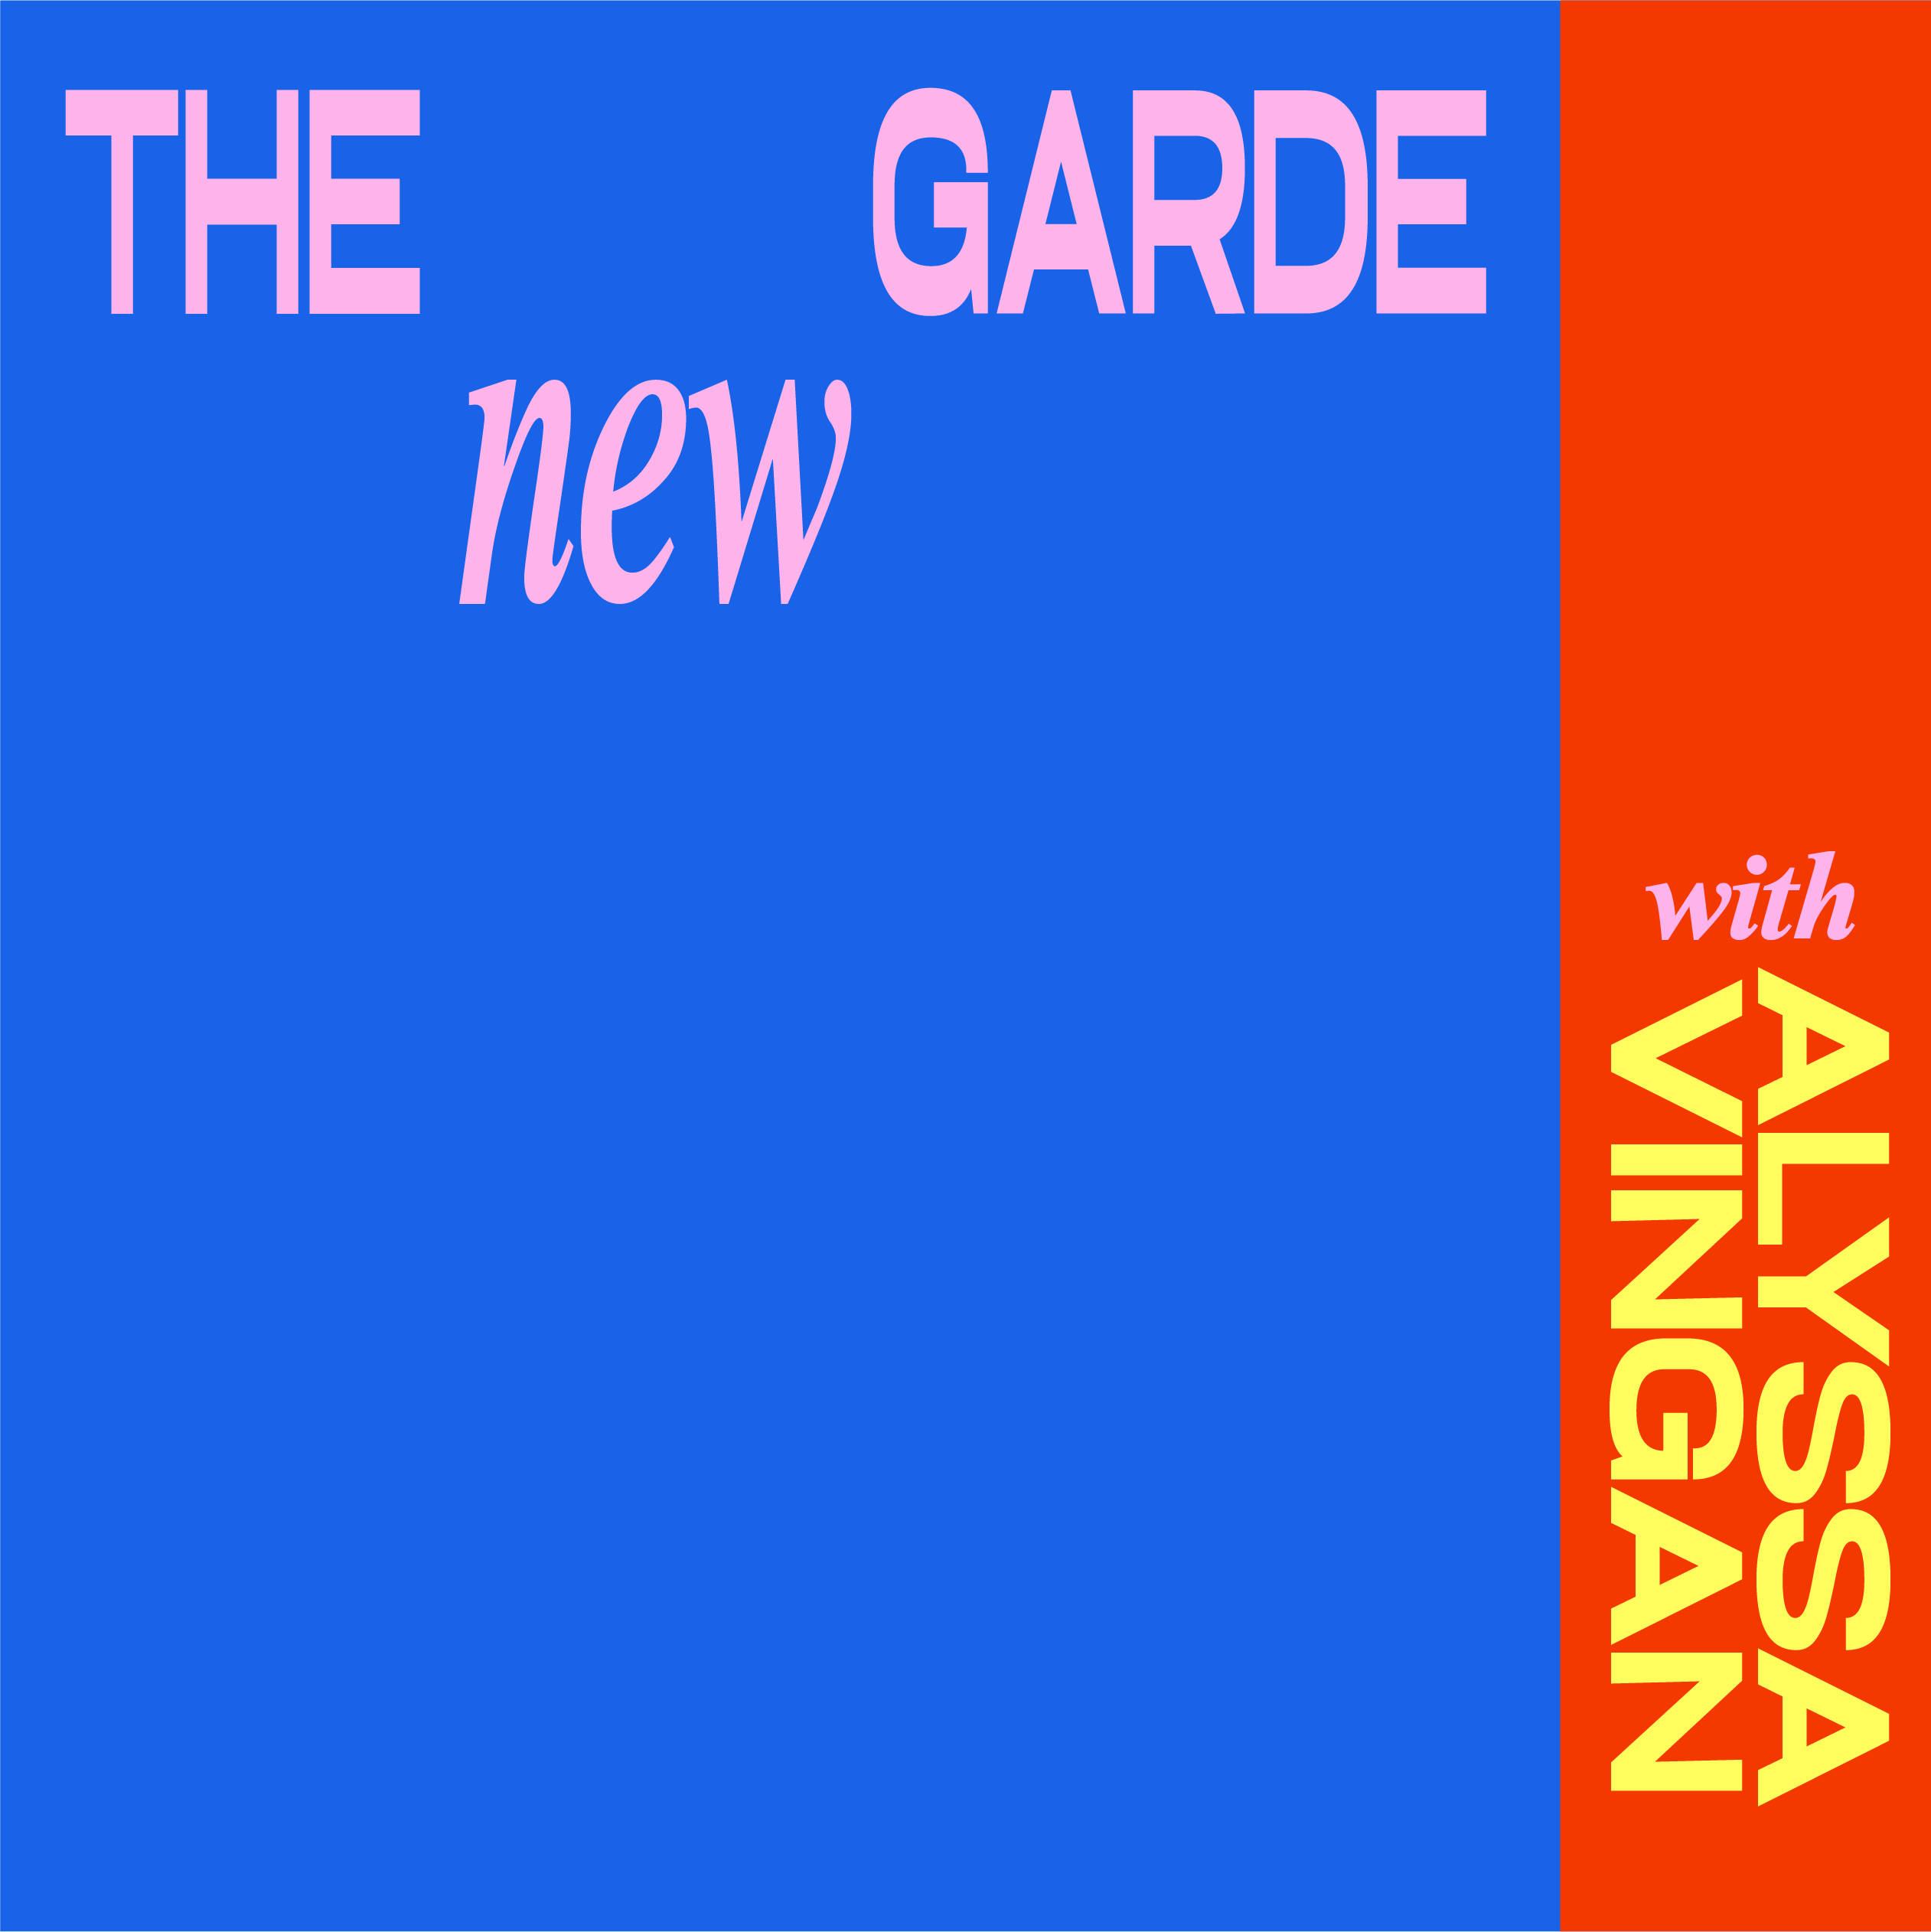 The New Garde